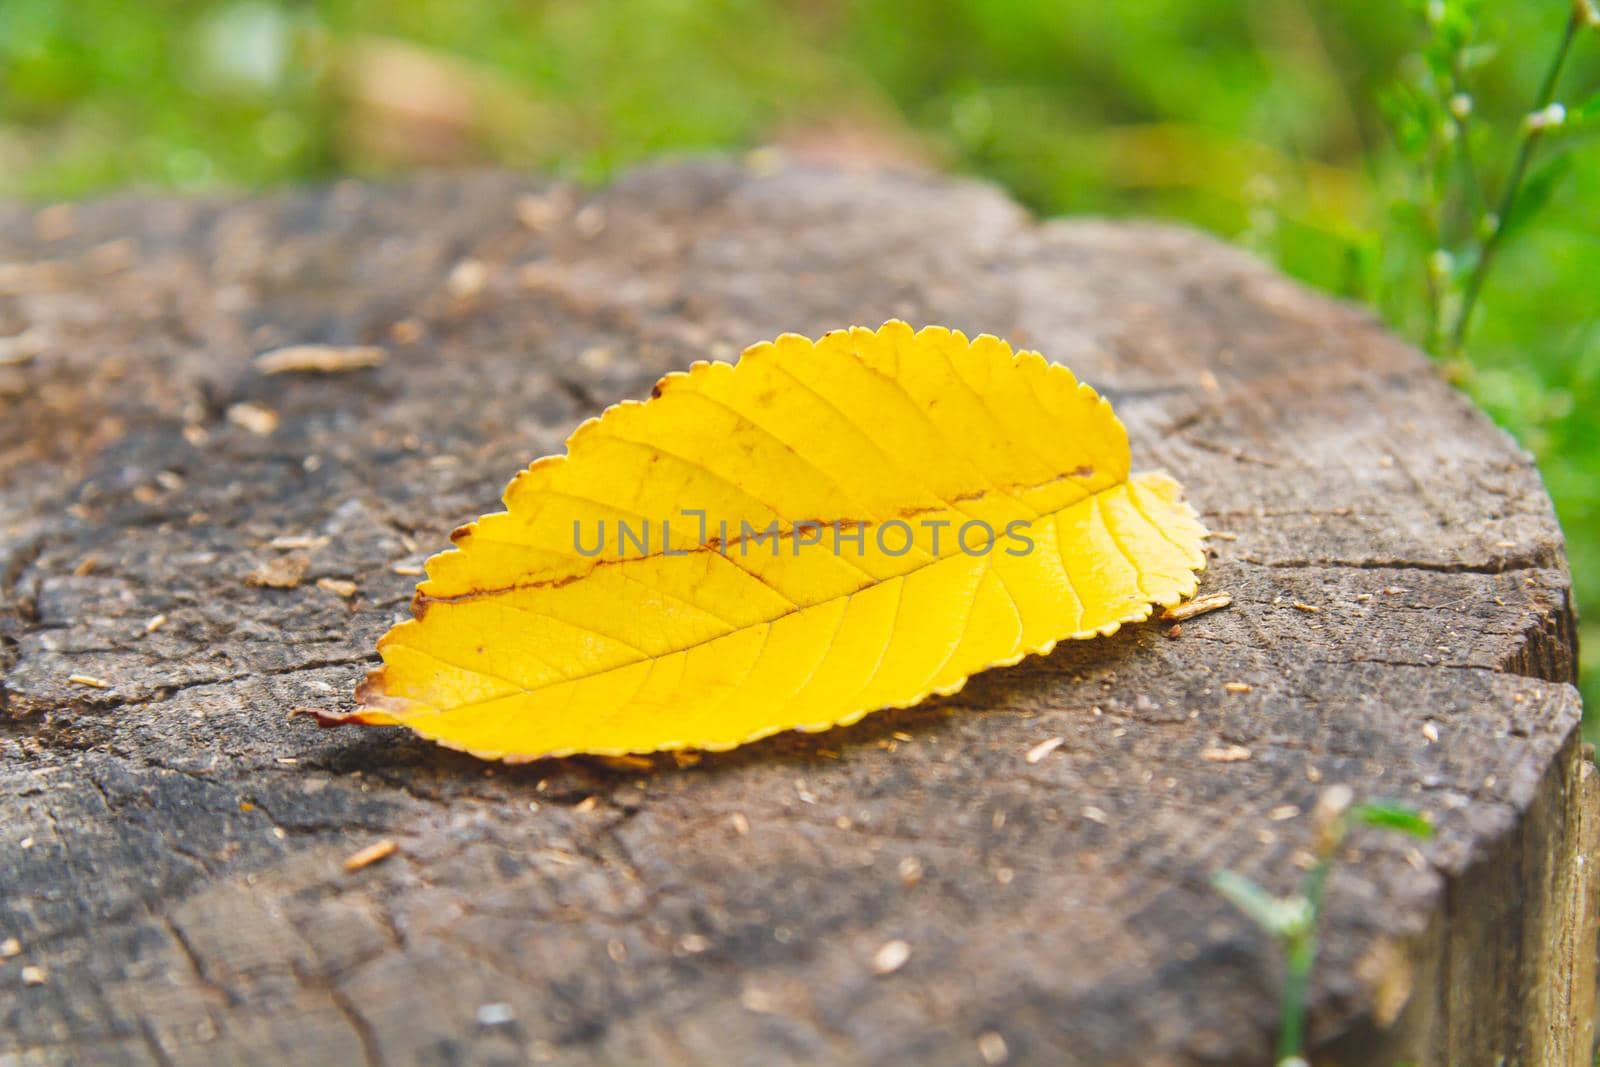 Autumn weather. Yellow leaf fallen from tree branch lies on green grass. Lone leaf. Change of seasons.